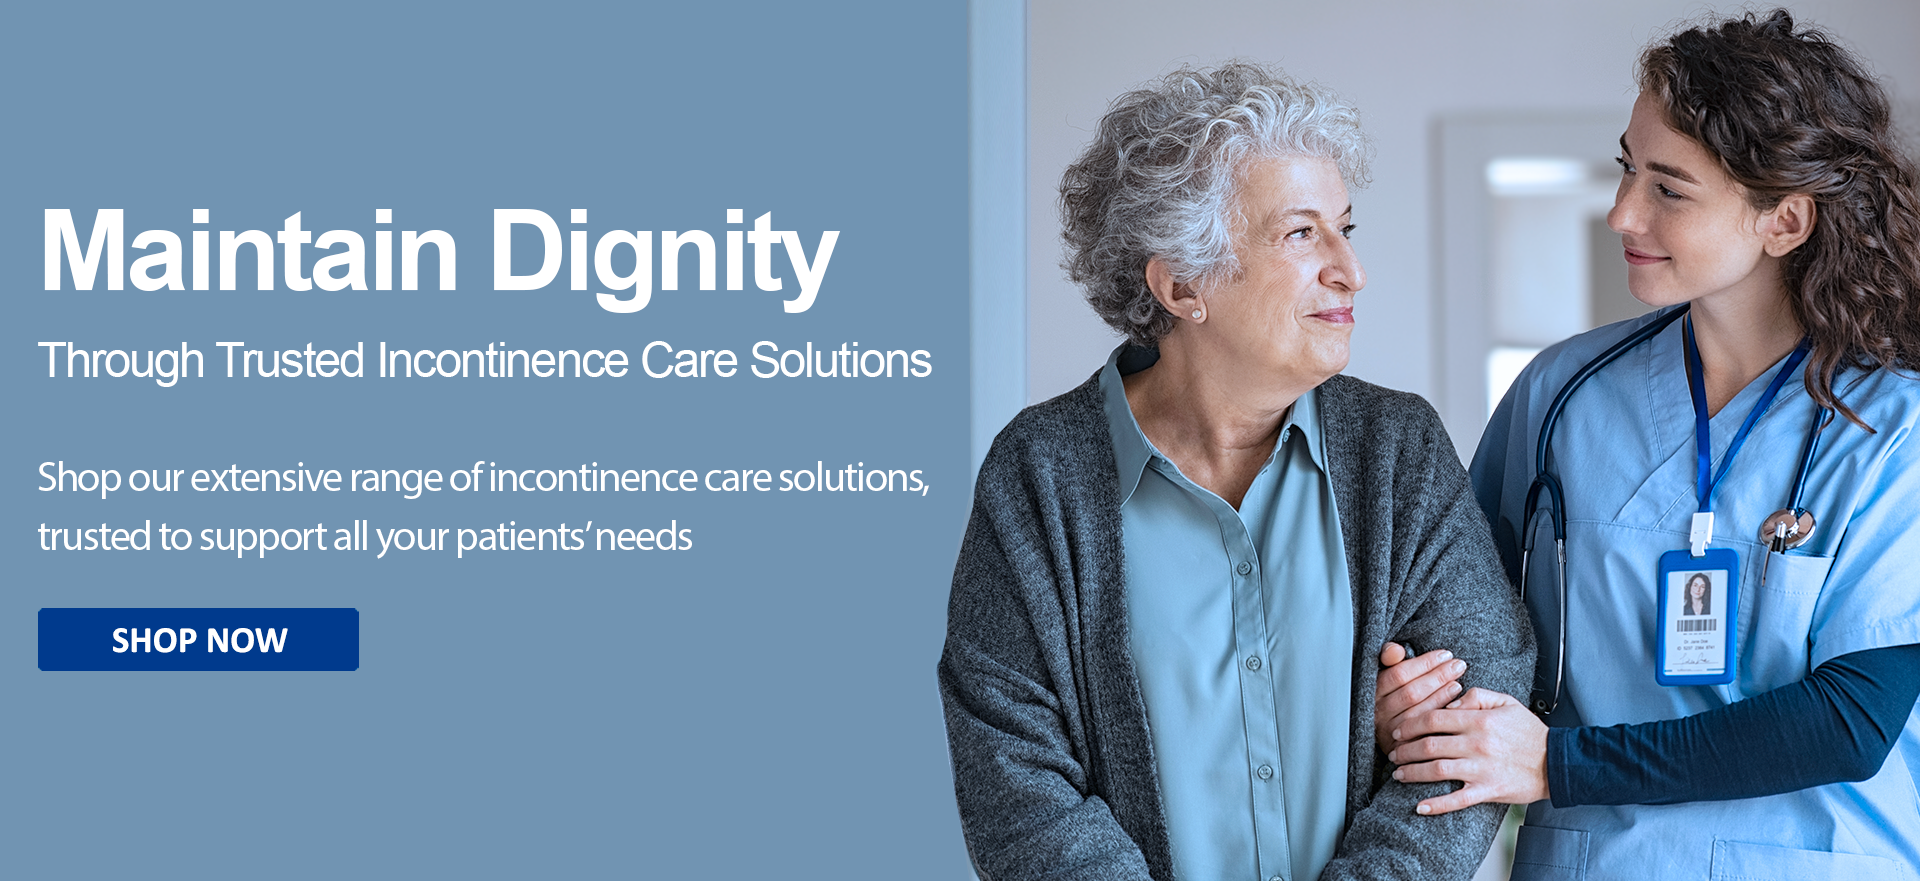 Trusted Incontinence Care Solutions